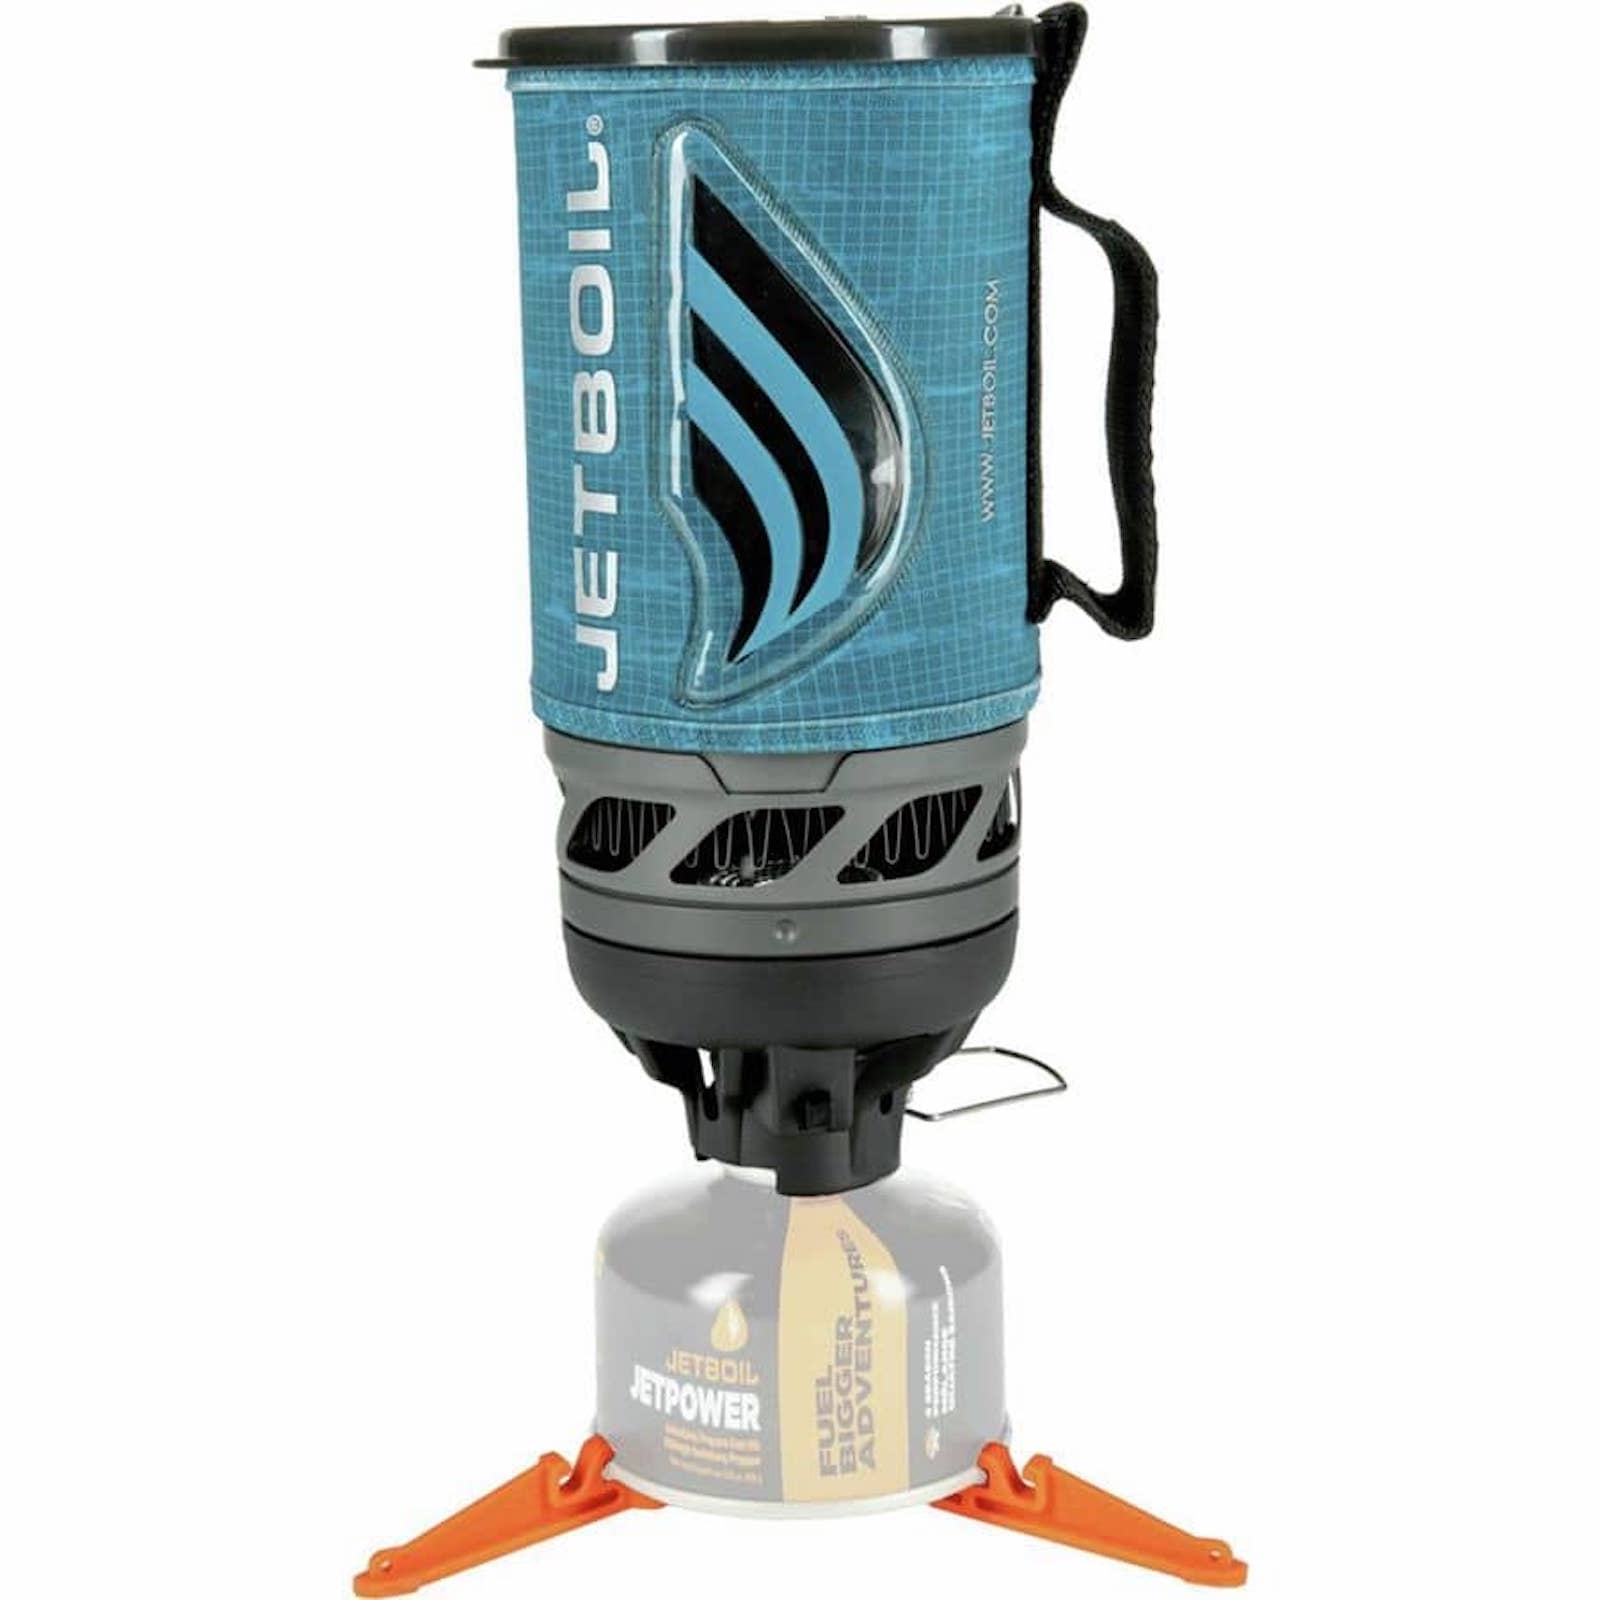 Best Family Camping Gear Checklist - Jetboil - Road trip Camping Checklist